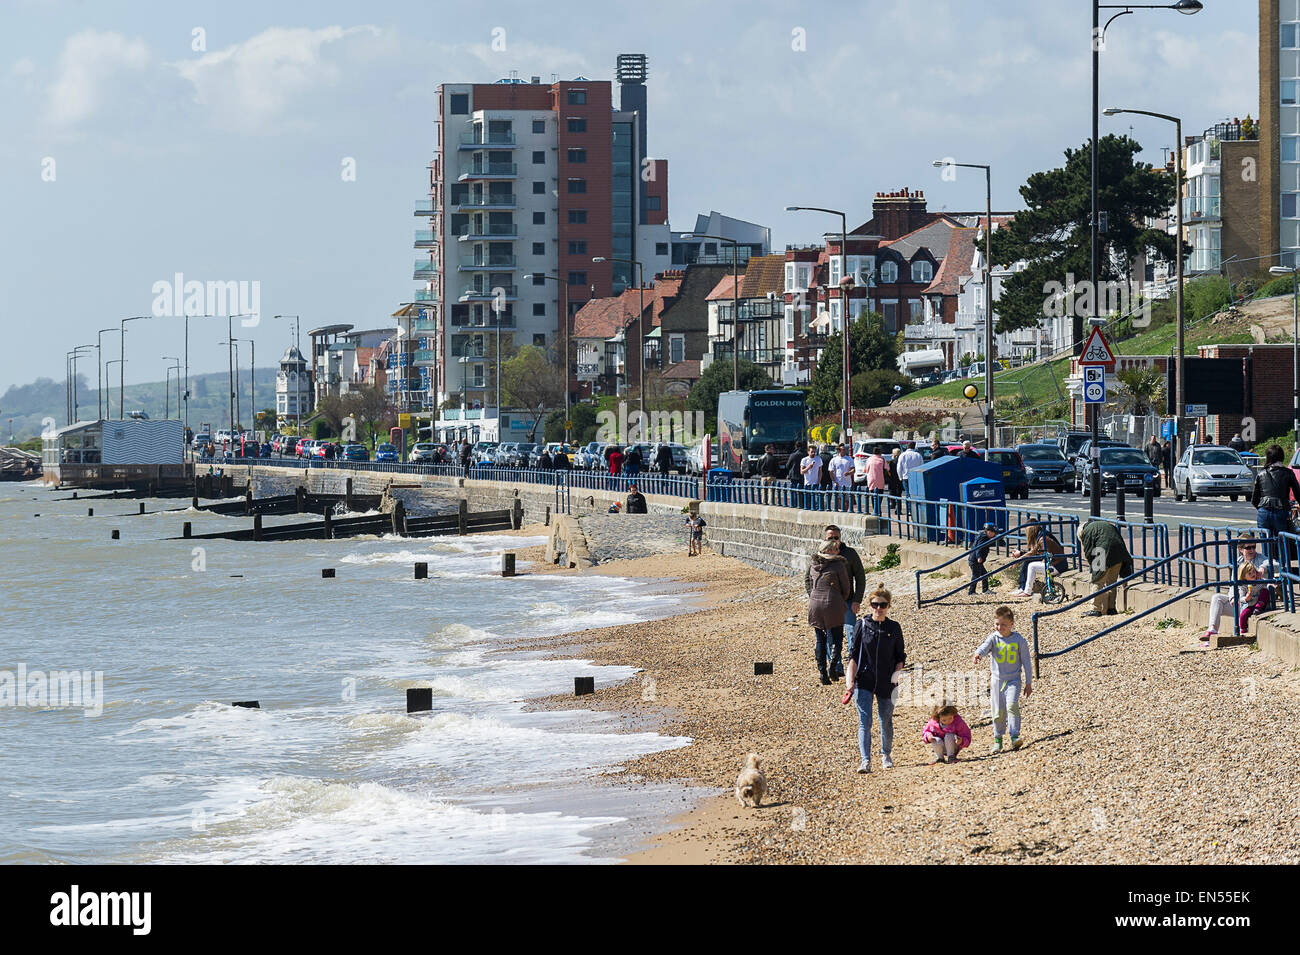 Southend seafront in Essex. Stock Photo